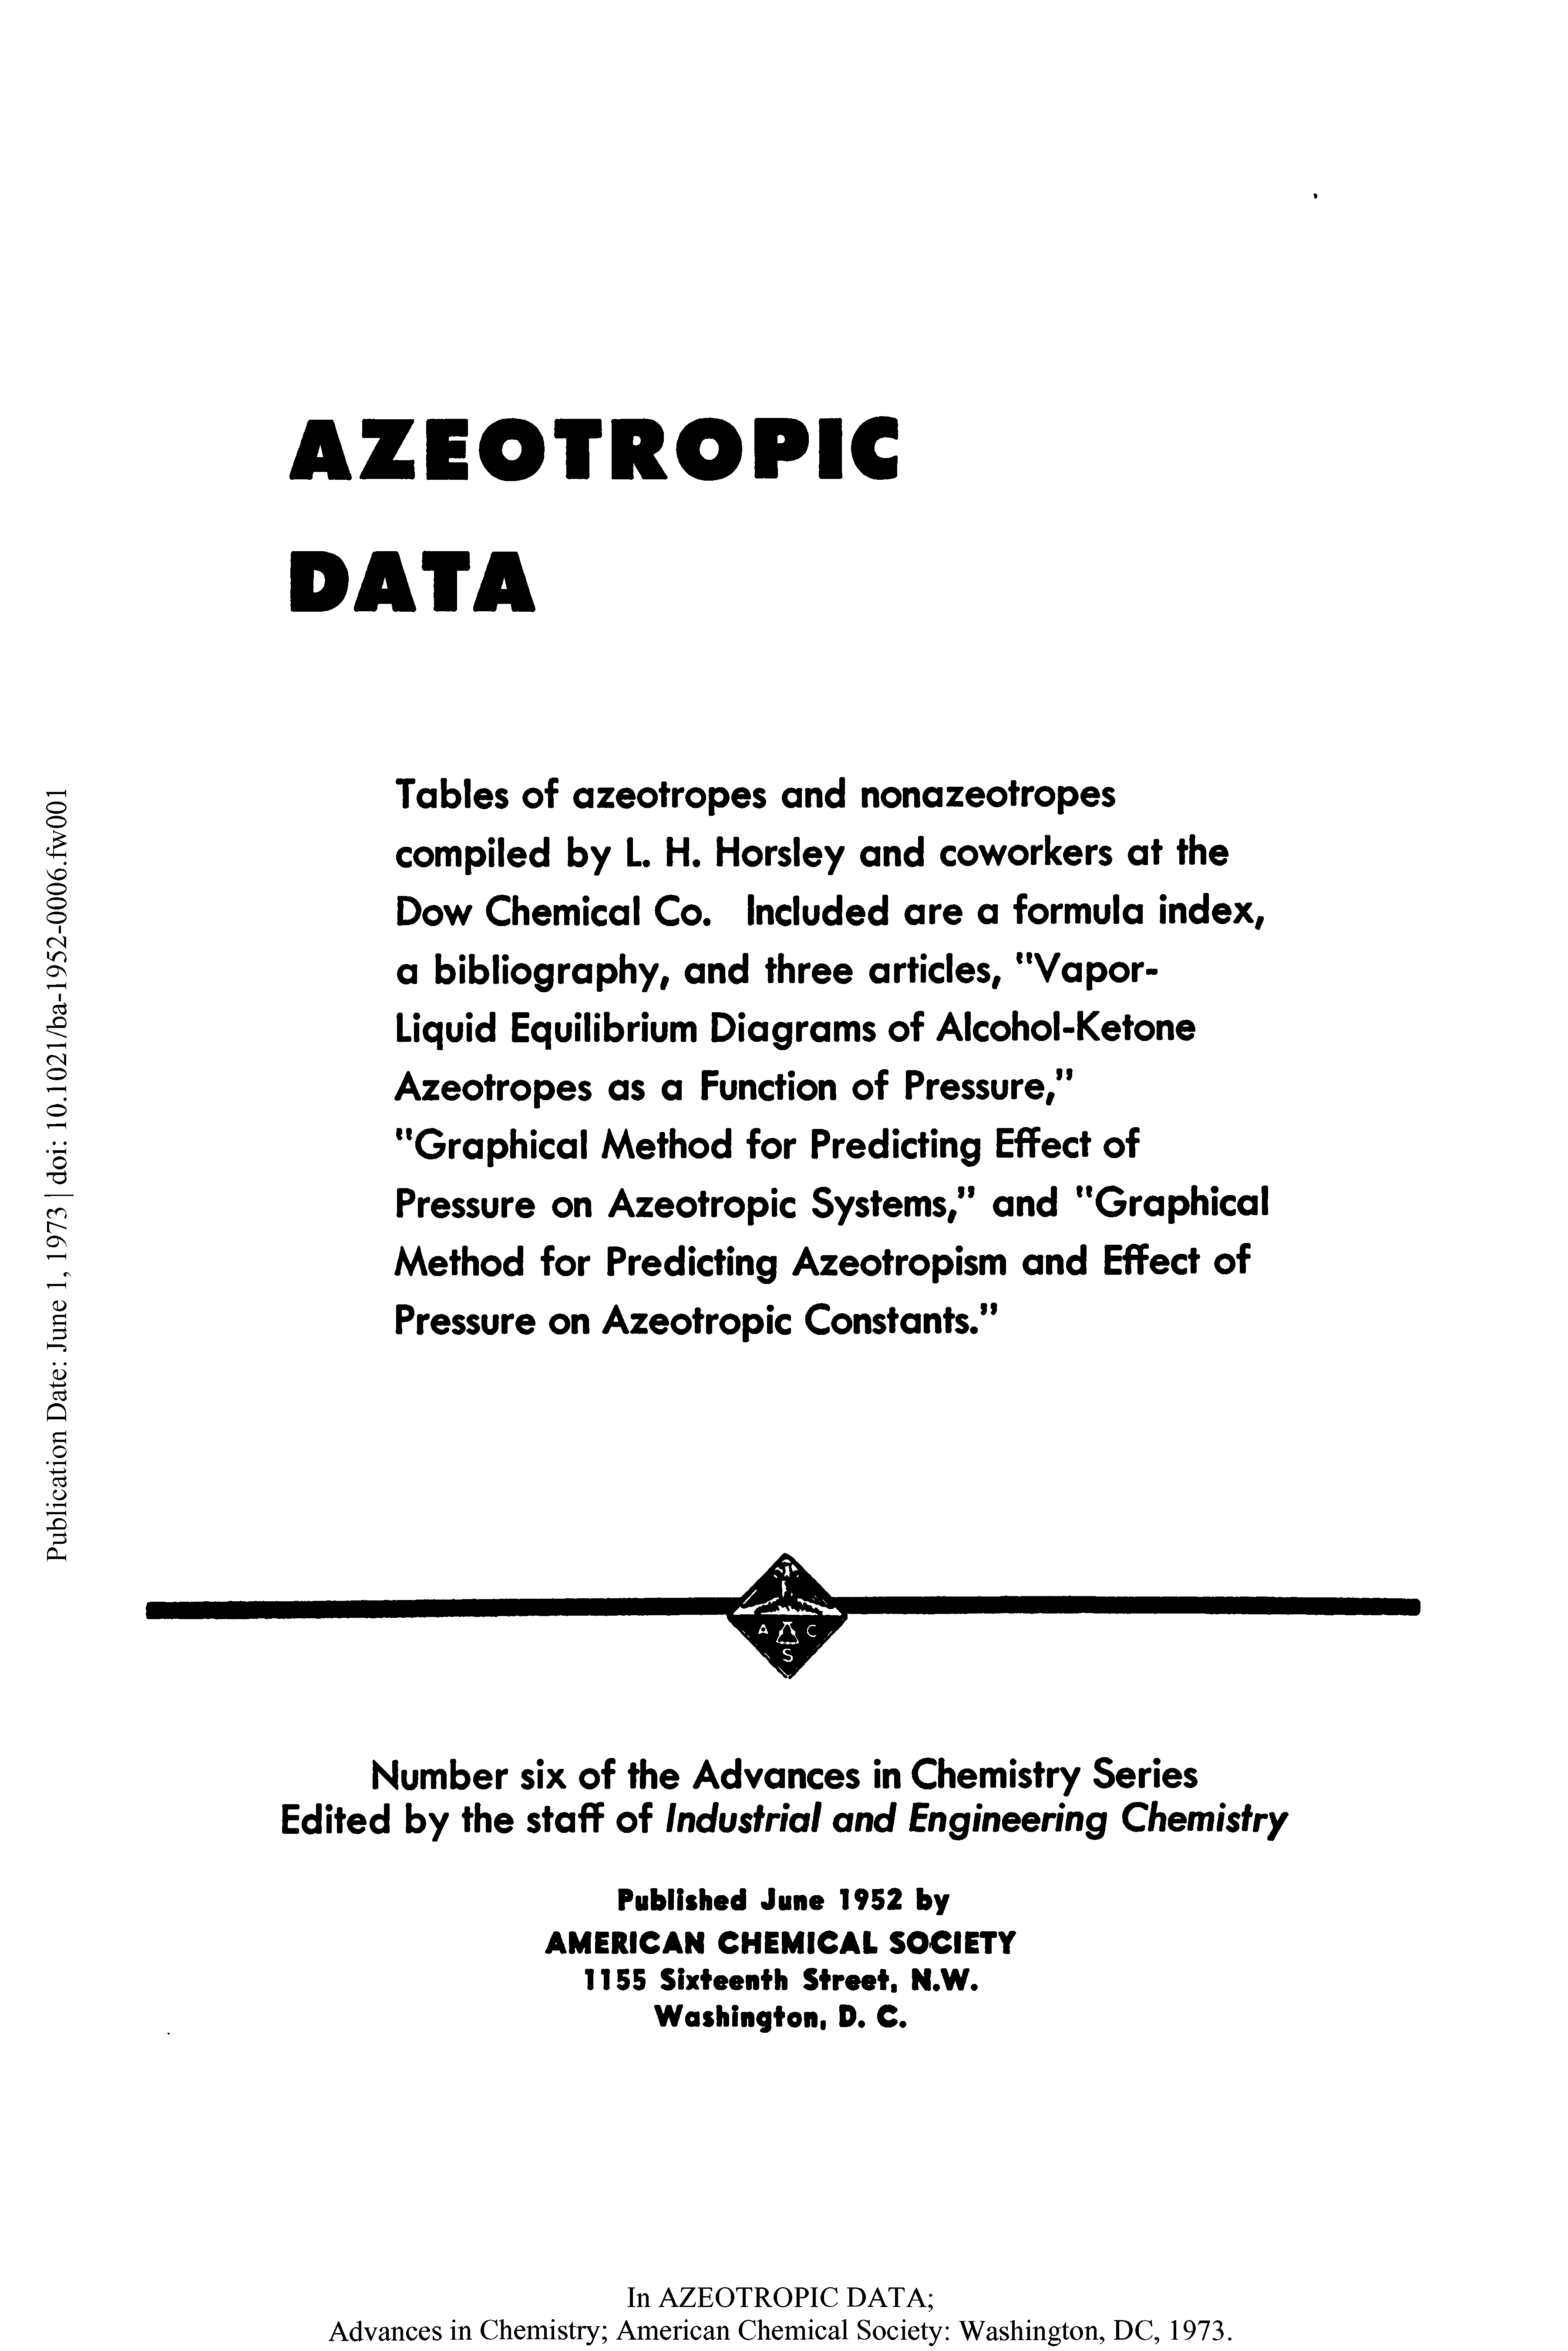 Tables of azeotropes and nonazeotropes compiled by L. H. Horsley and coworkers at the Dow Chemical Co. Included are a formula index, a bibliography, and three articles, "Vapor-Liquid Equilibrium Diagrams of Alcohol-Ketone Azeotropes as a Function of Pressure, ...